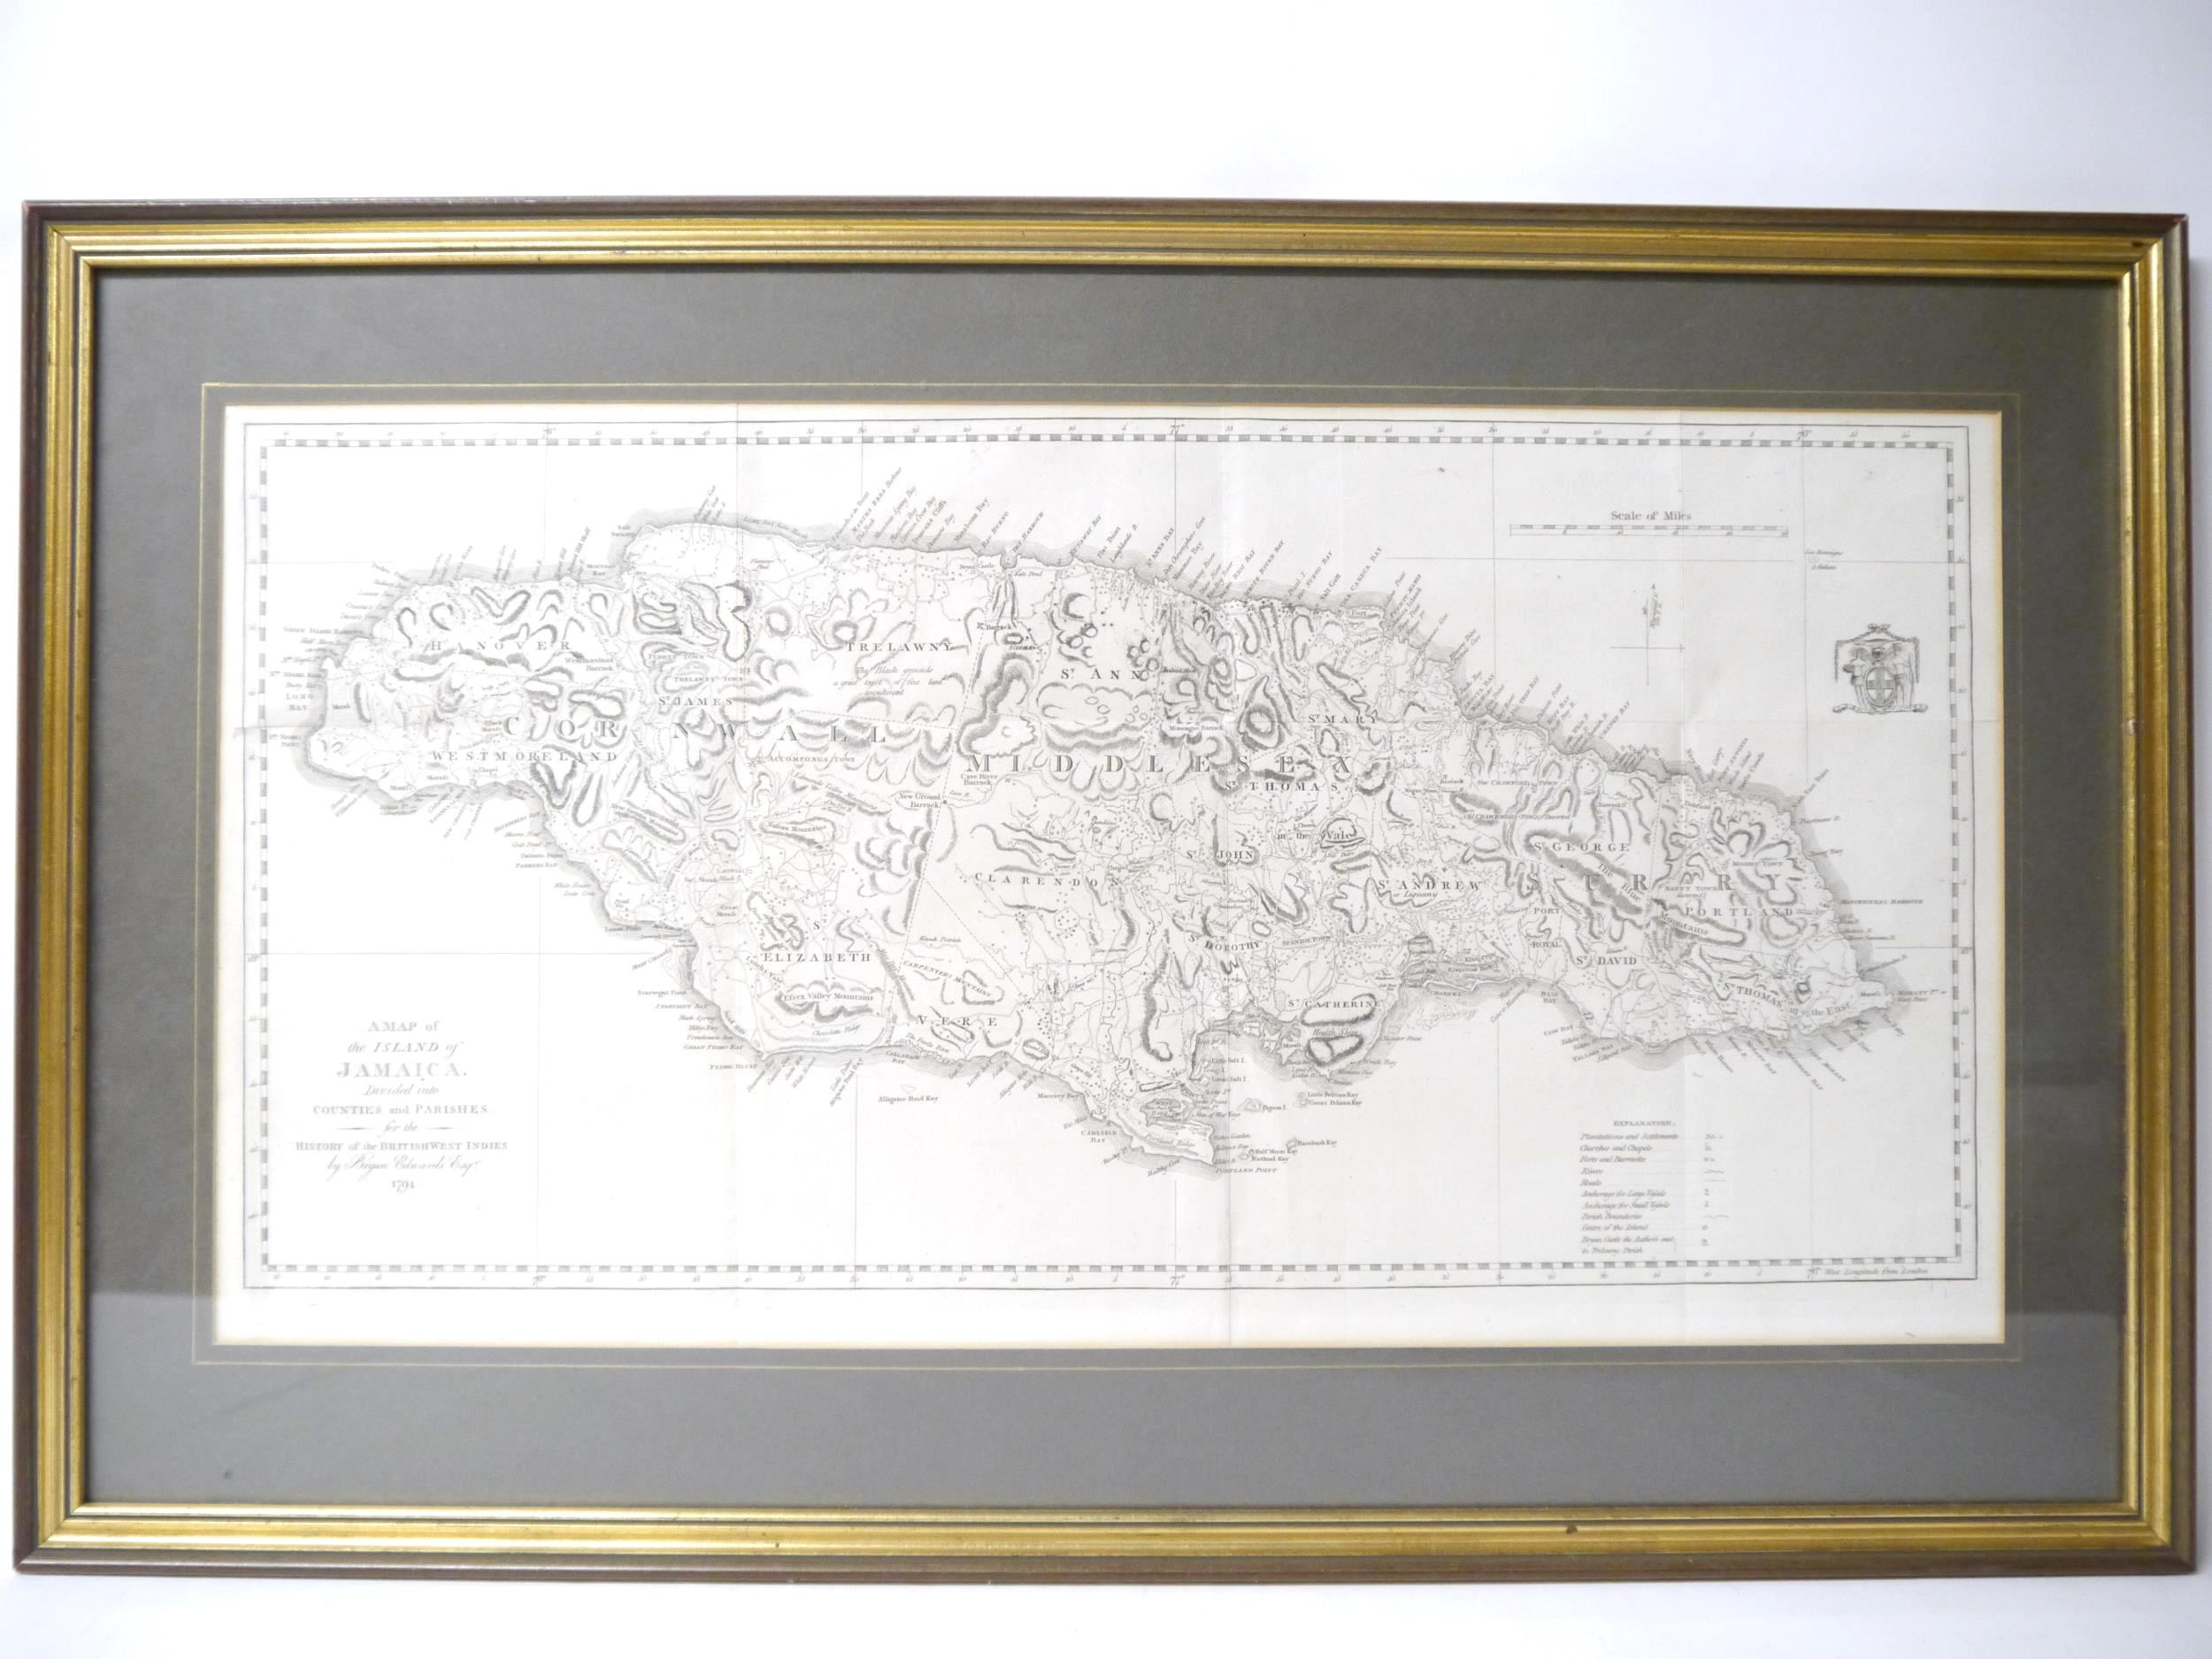 (Jamaica), 'A Map of the Island of Jamaica. Divided into Counties and Parishes, for the History of